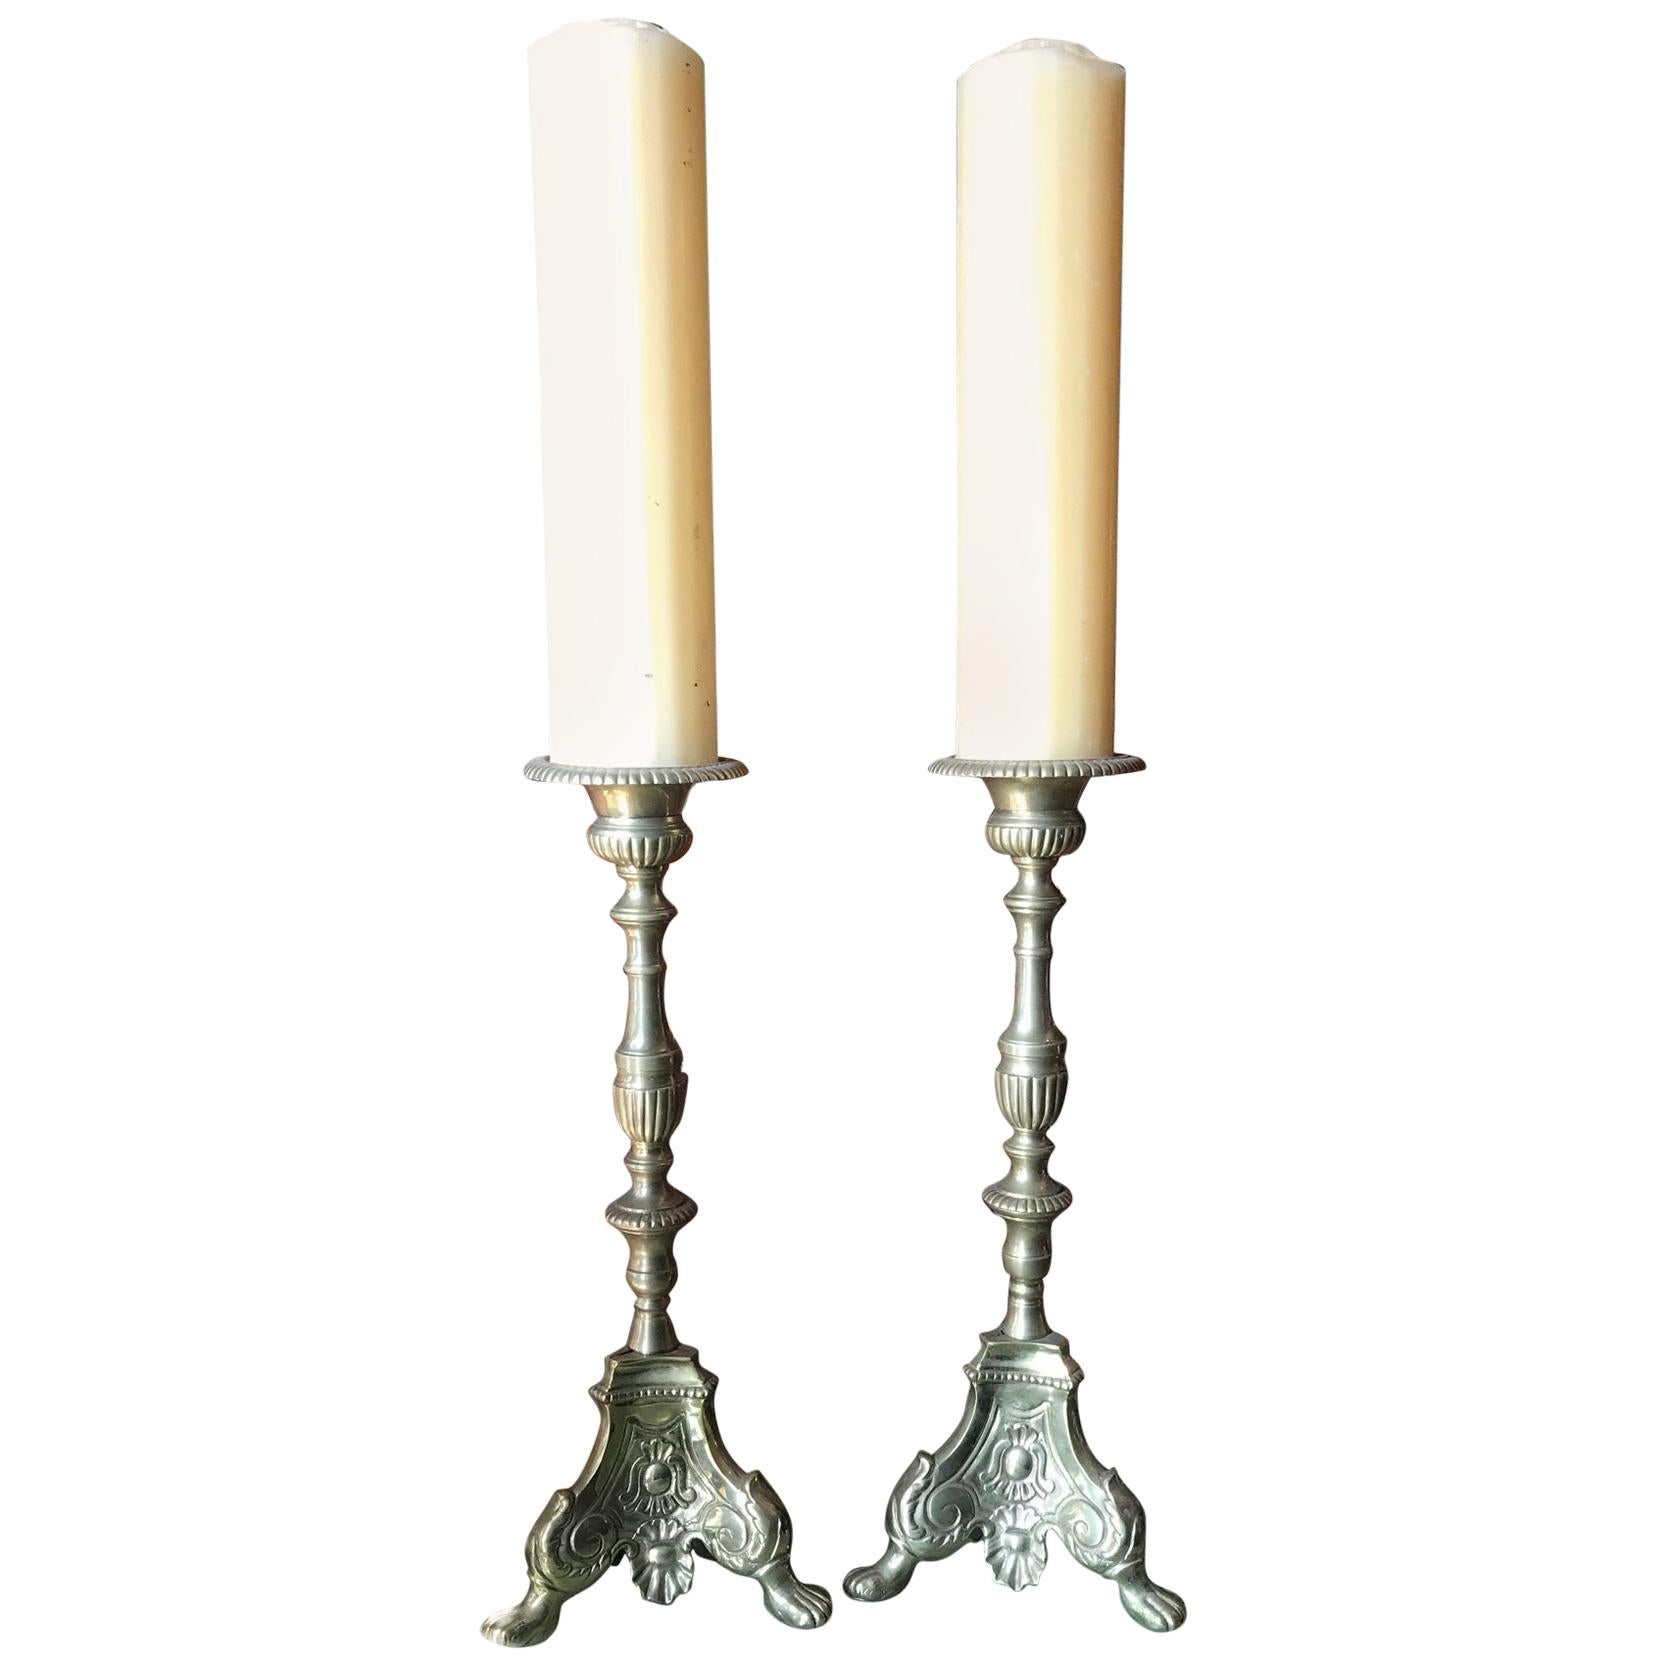 18th Century Candlesticks Candleholder Light in Brass Antique Gift Object, Pair For Sale